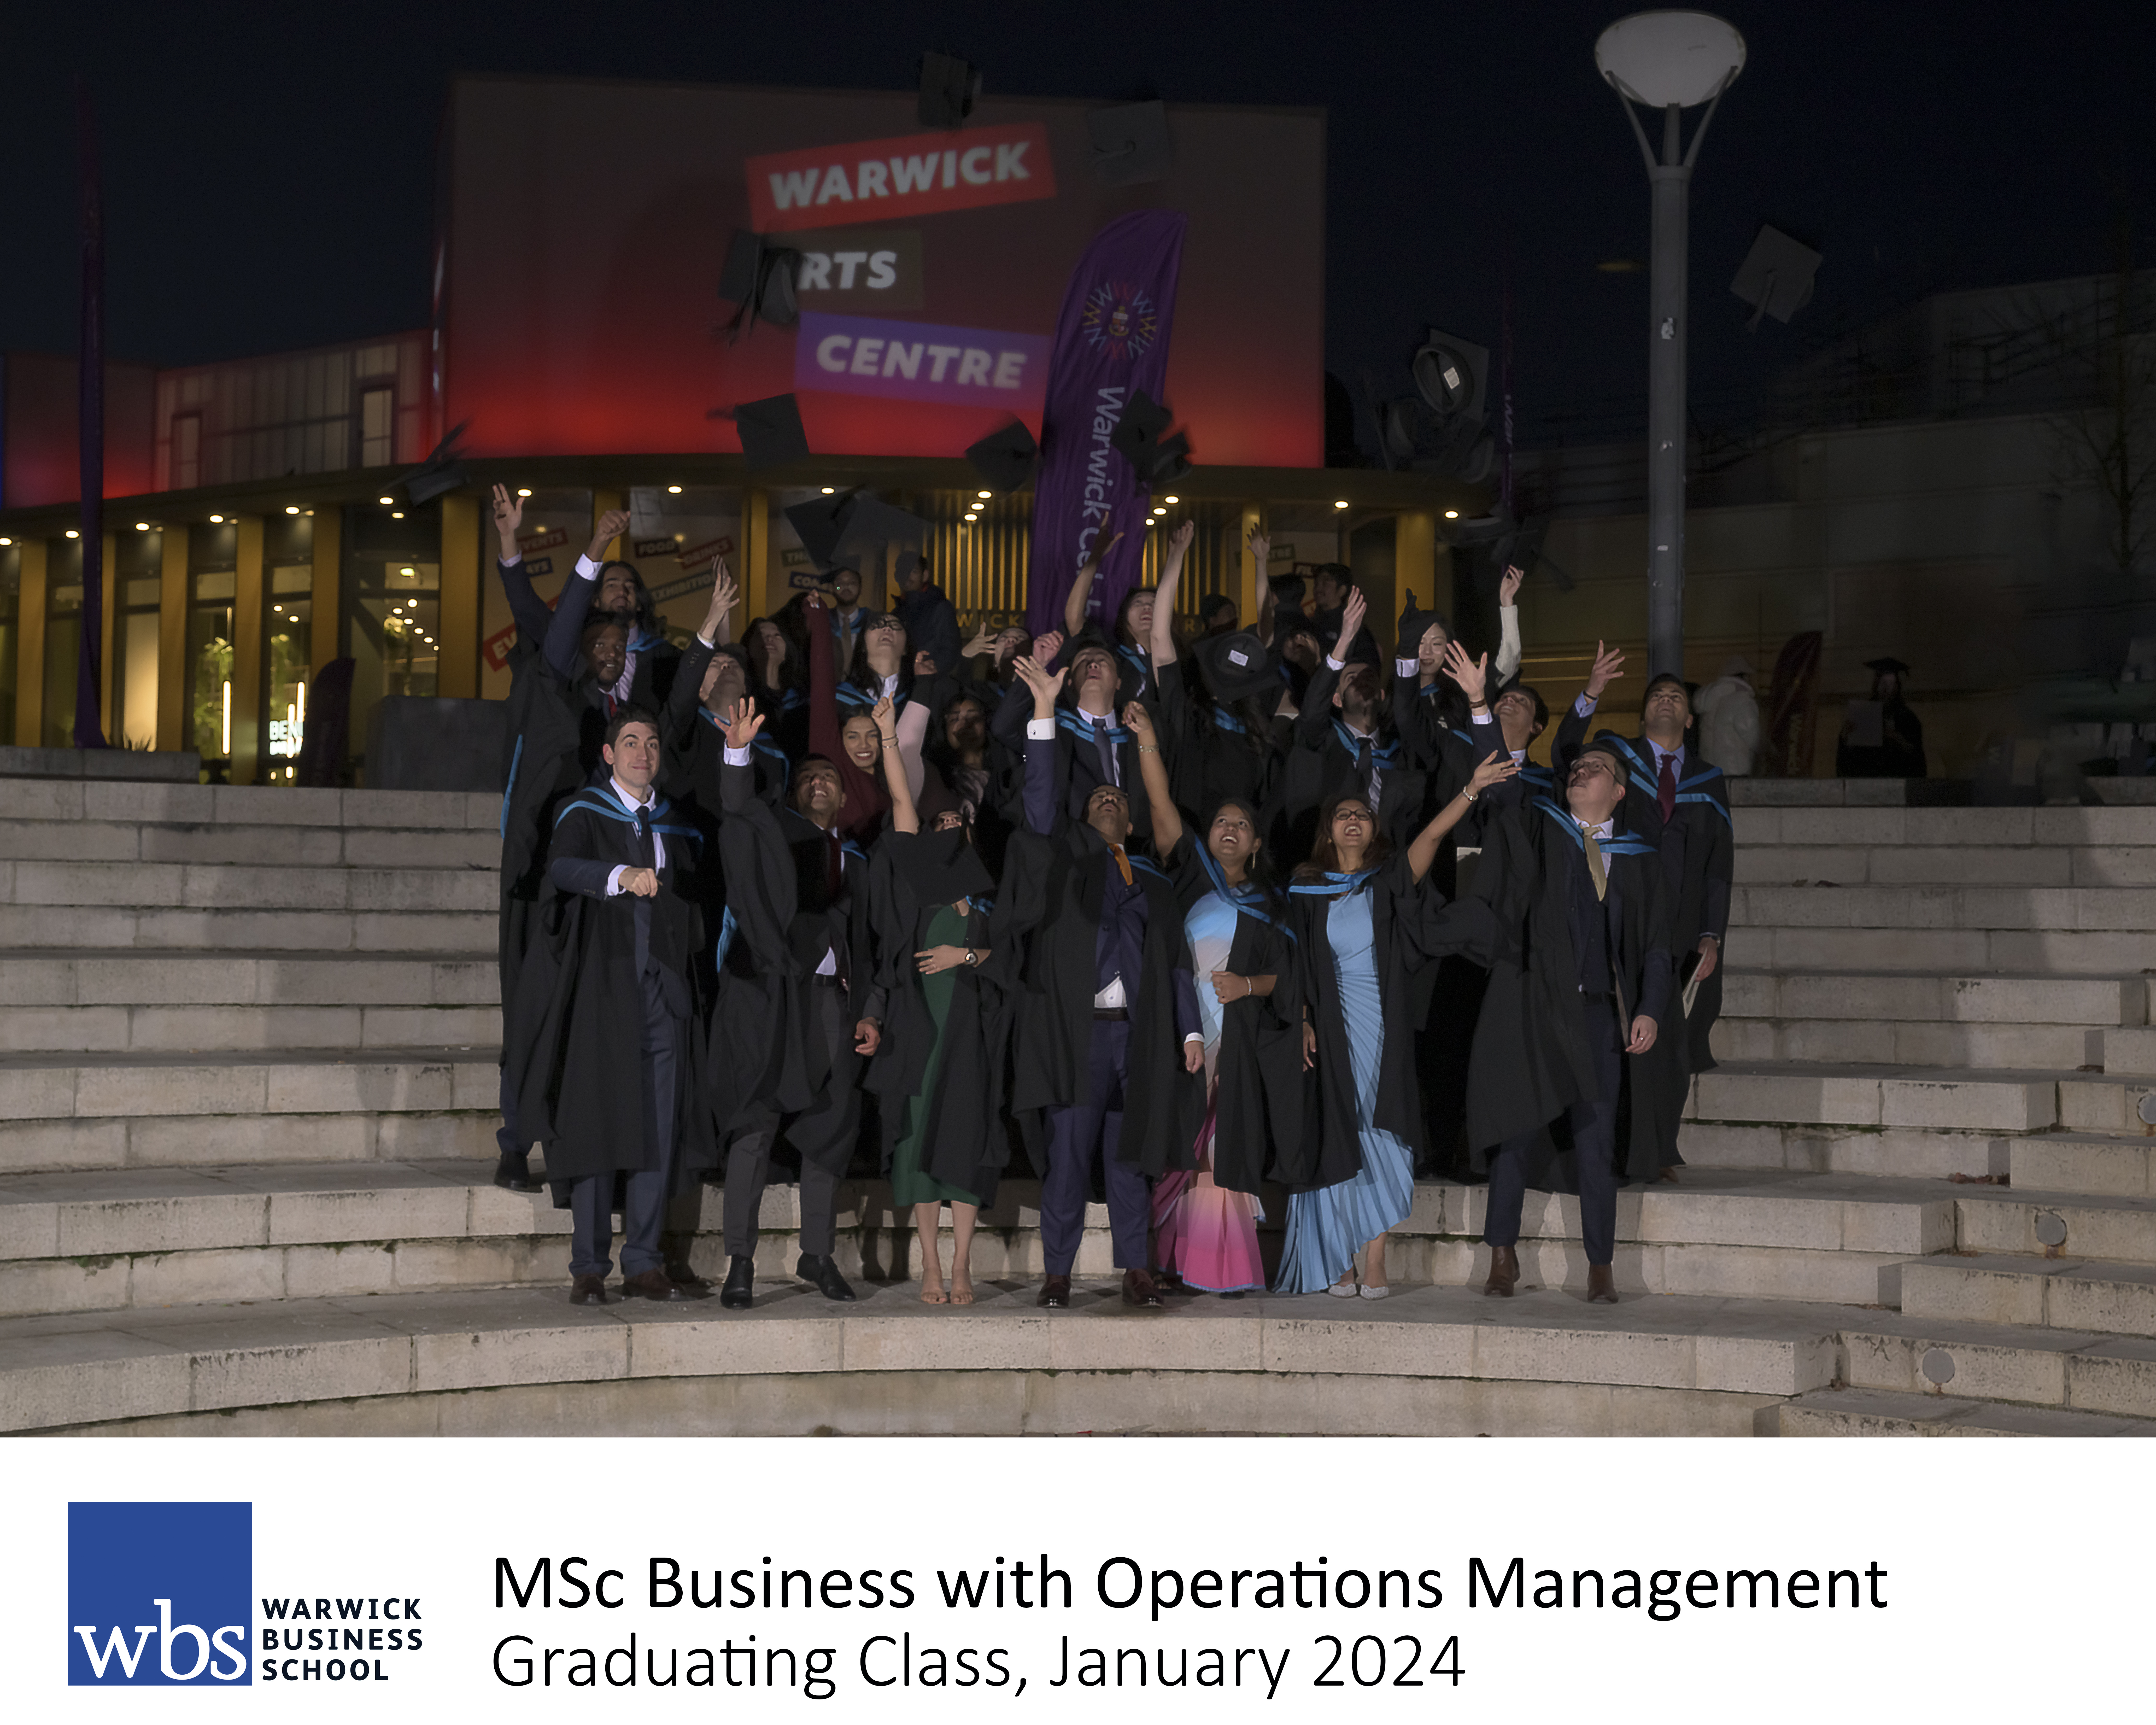 wbs_grad_jan_24_-_msc_business_with_operations_management_hats_captioned.jpg